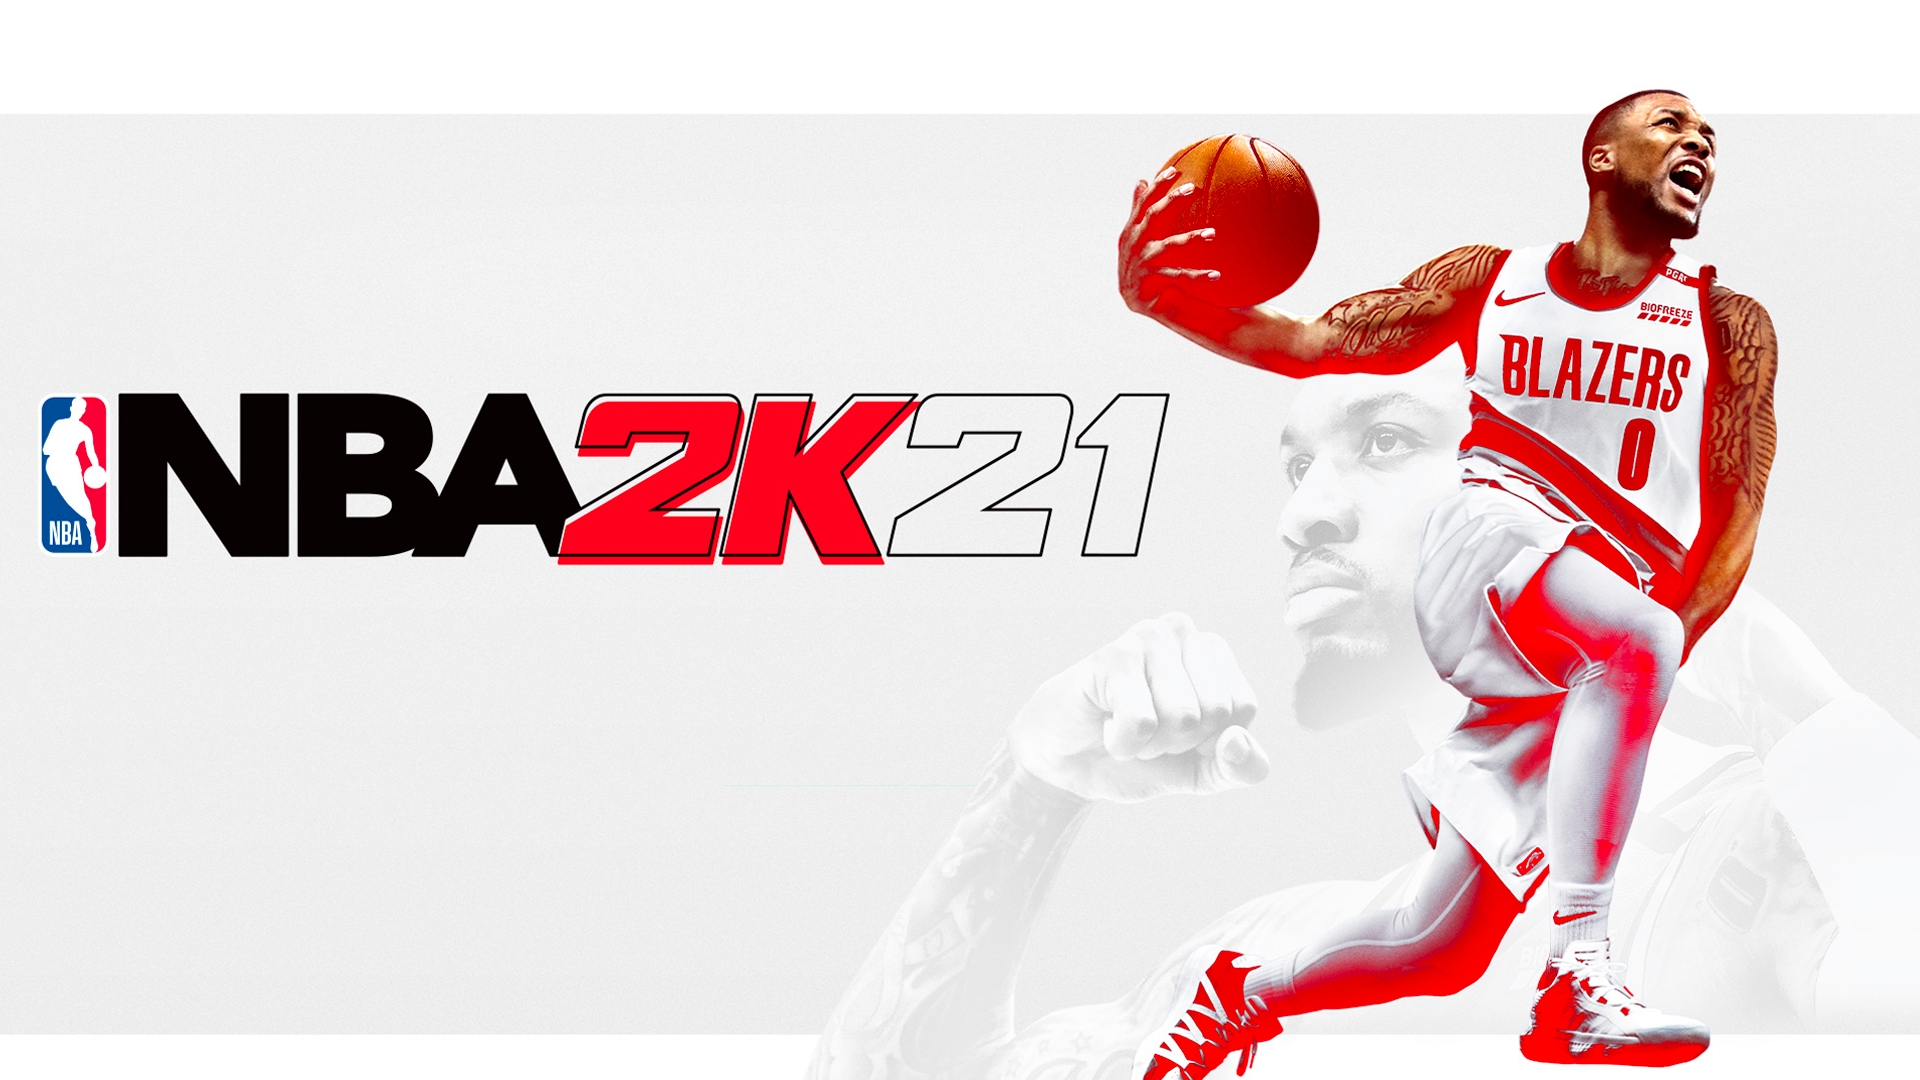 NBA 2K21 is approximately 121.7 GB on Xbox Series X. : r/NBA2k